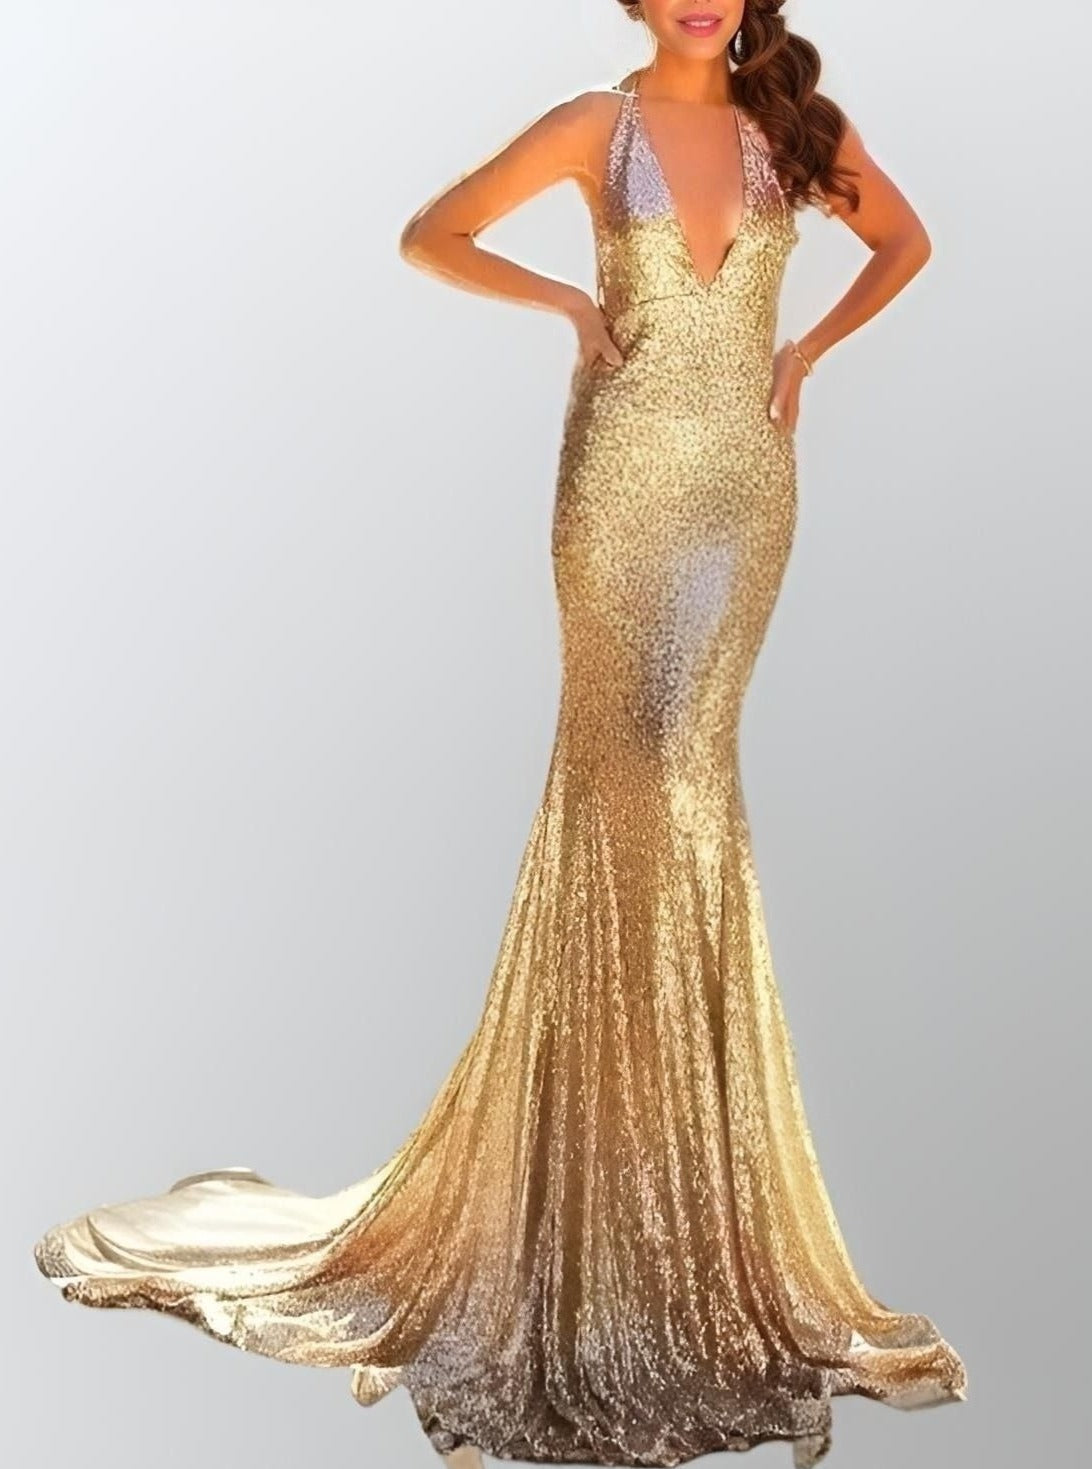 Women in Sexy Gold Sequined Backless Evening Gown with V Neck